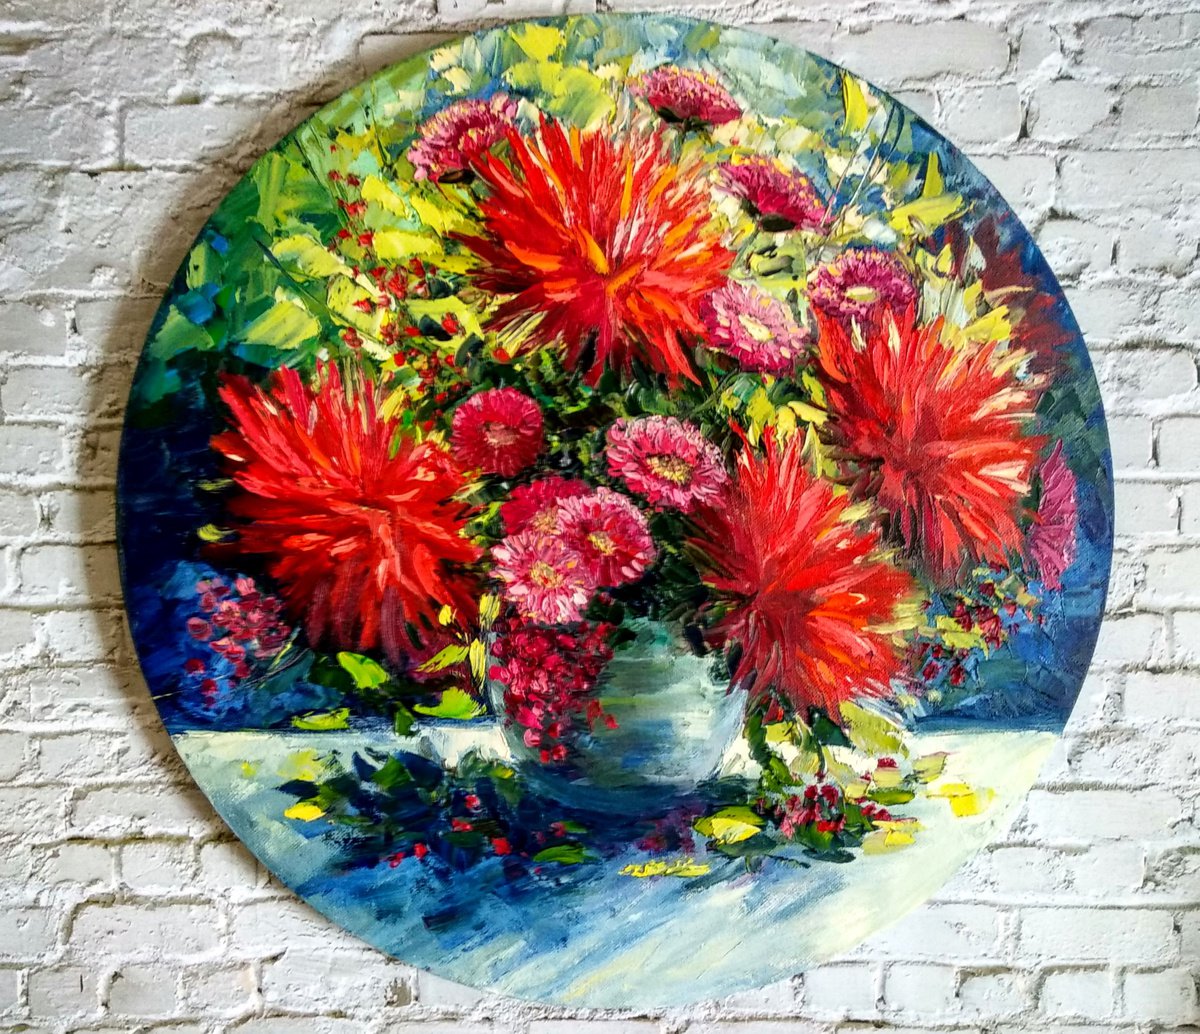 Bright Flowers Garden Bouquet of Asters and Daisies Textured Painting on Round Canvas by Anastasia Art Line